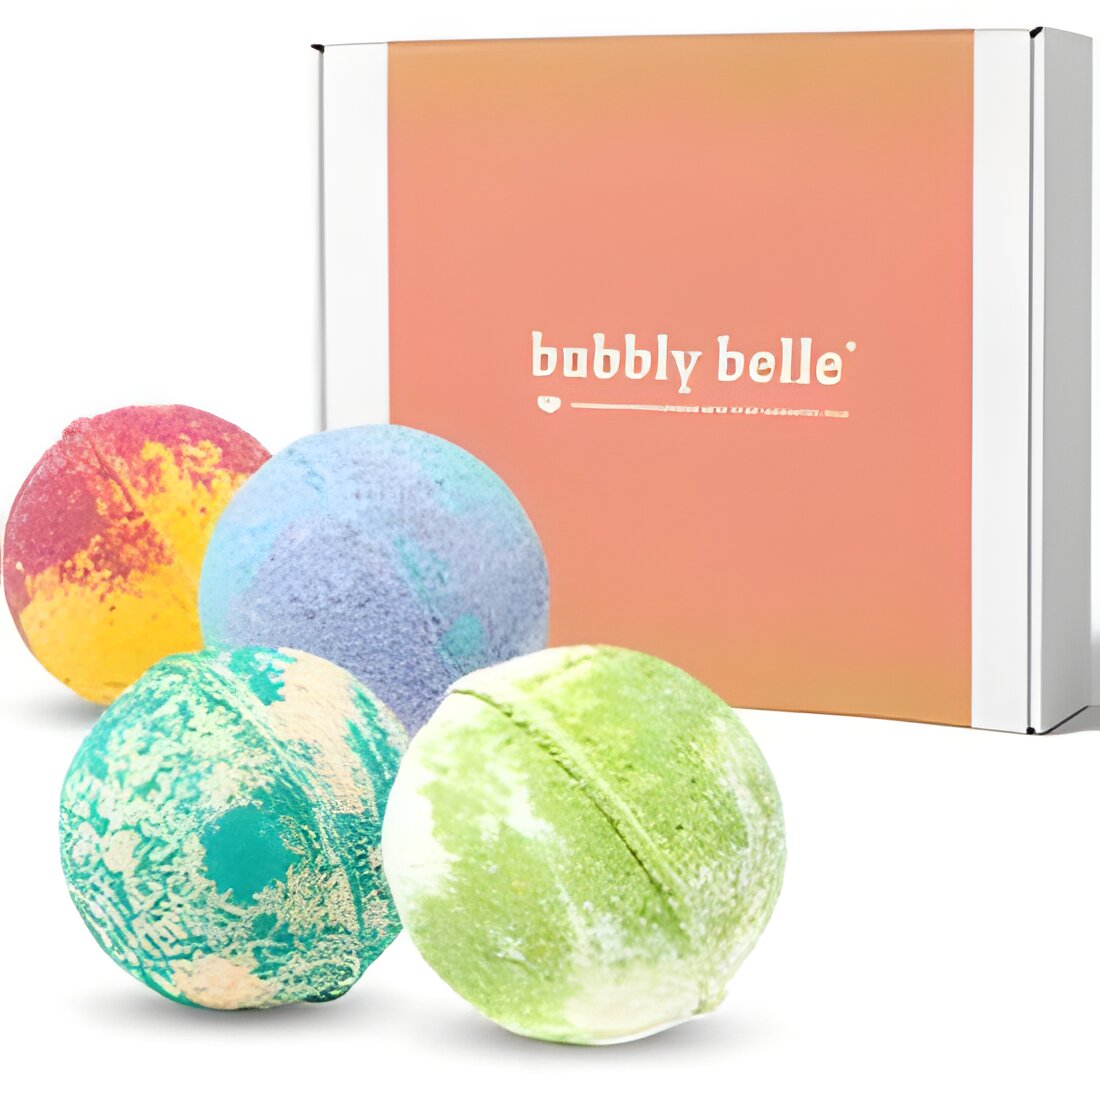 Free Bubbly Belle Bath Bombs Gift Set